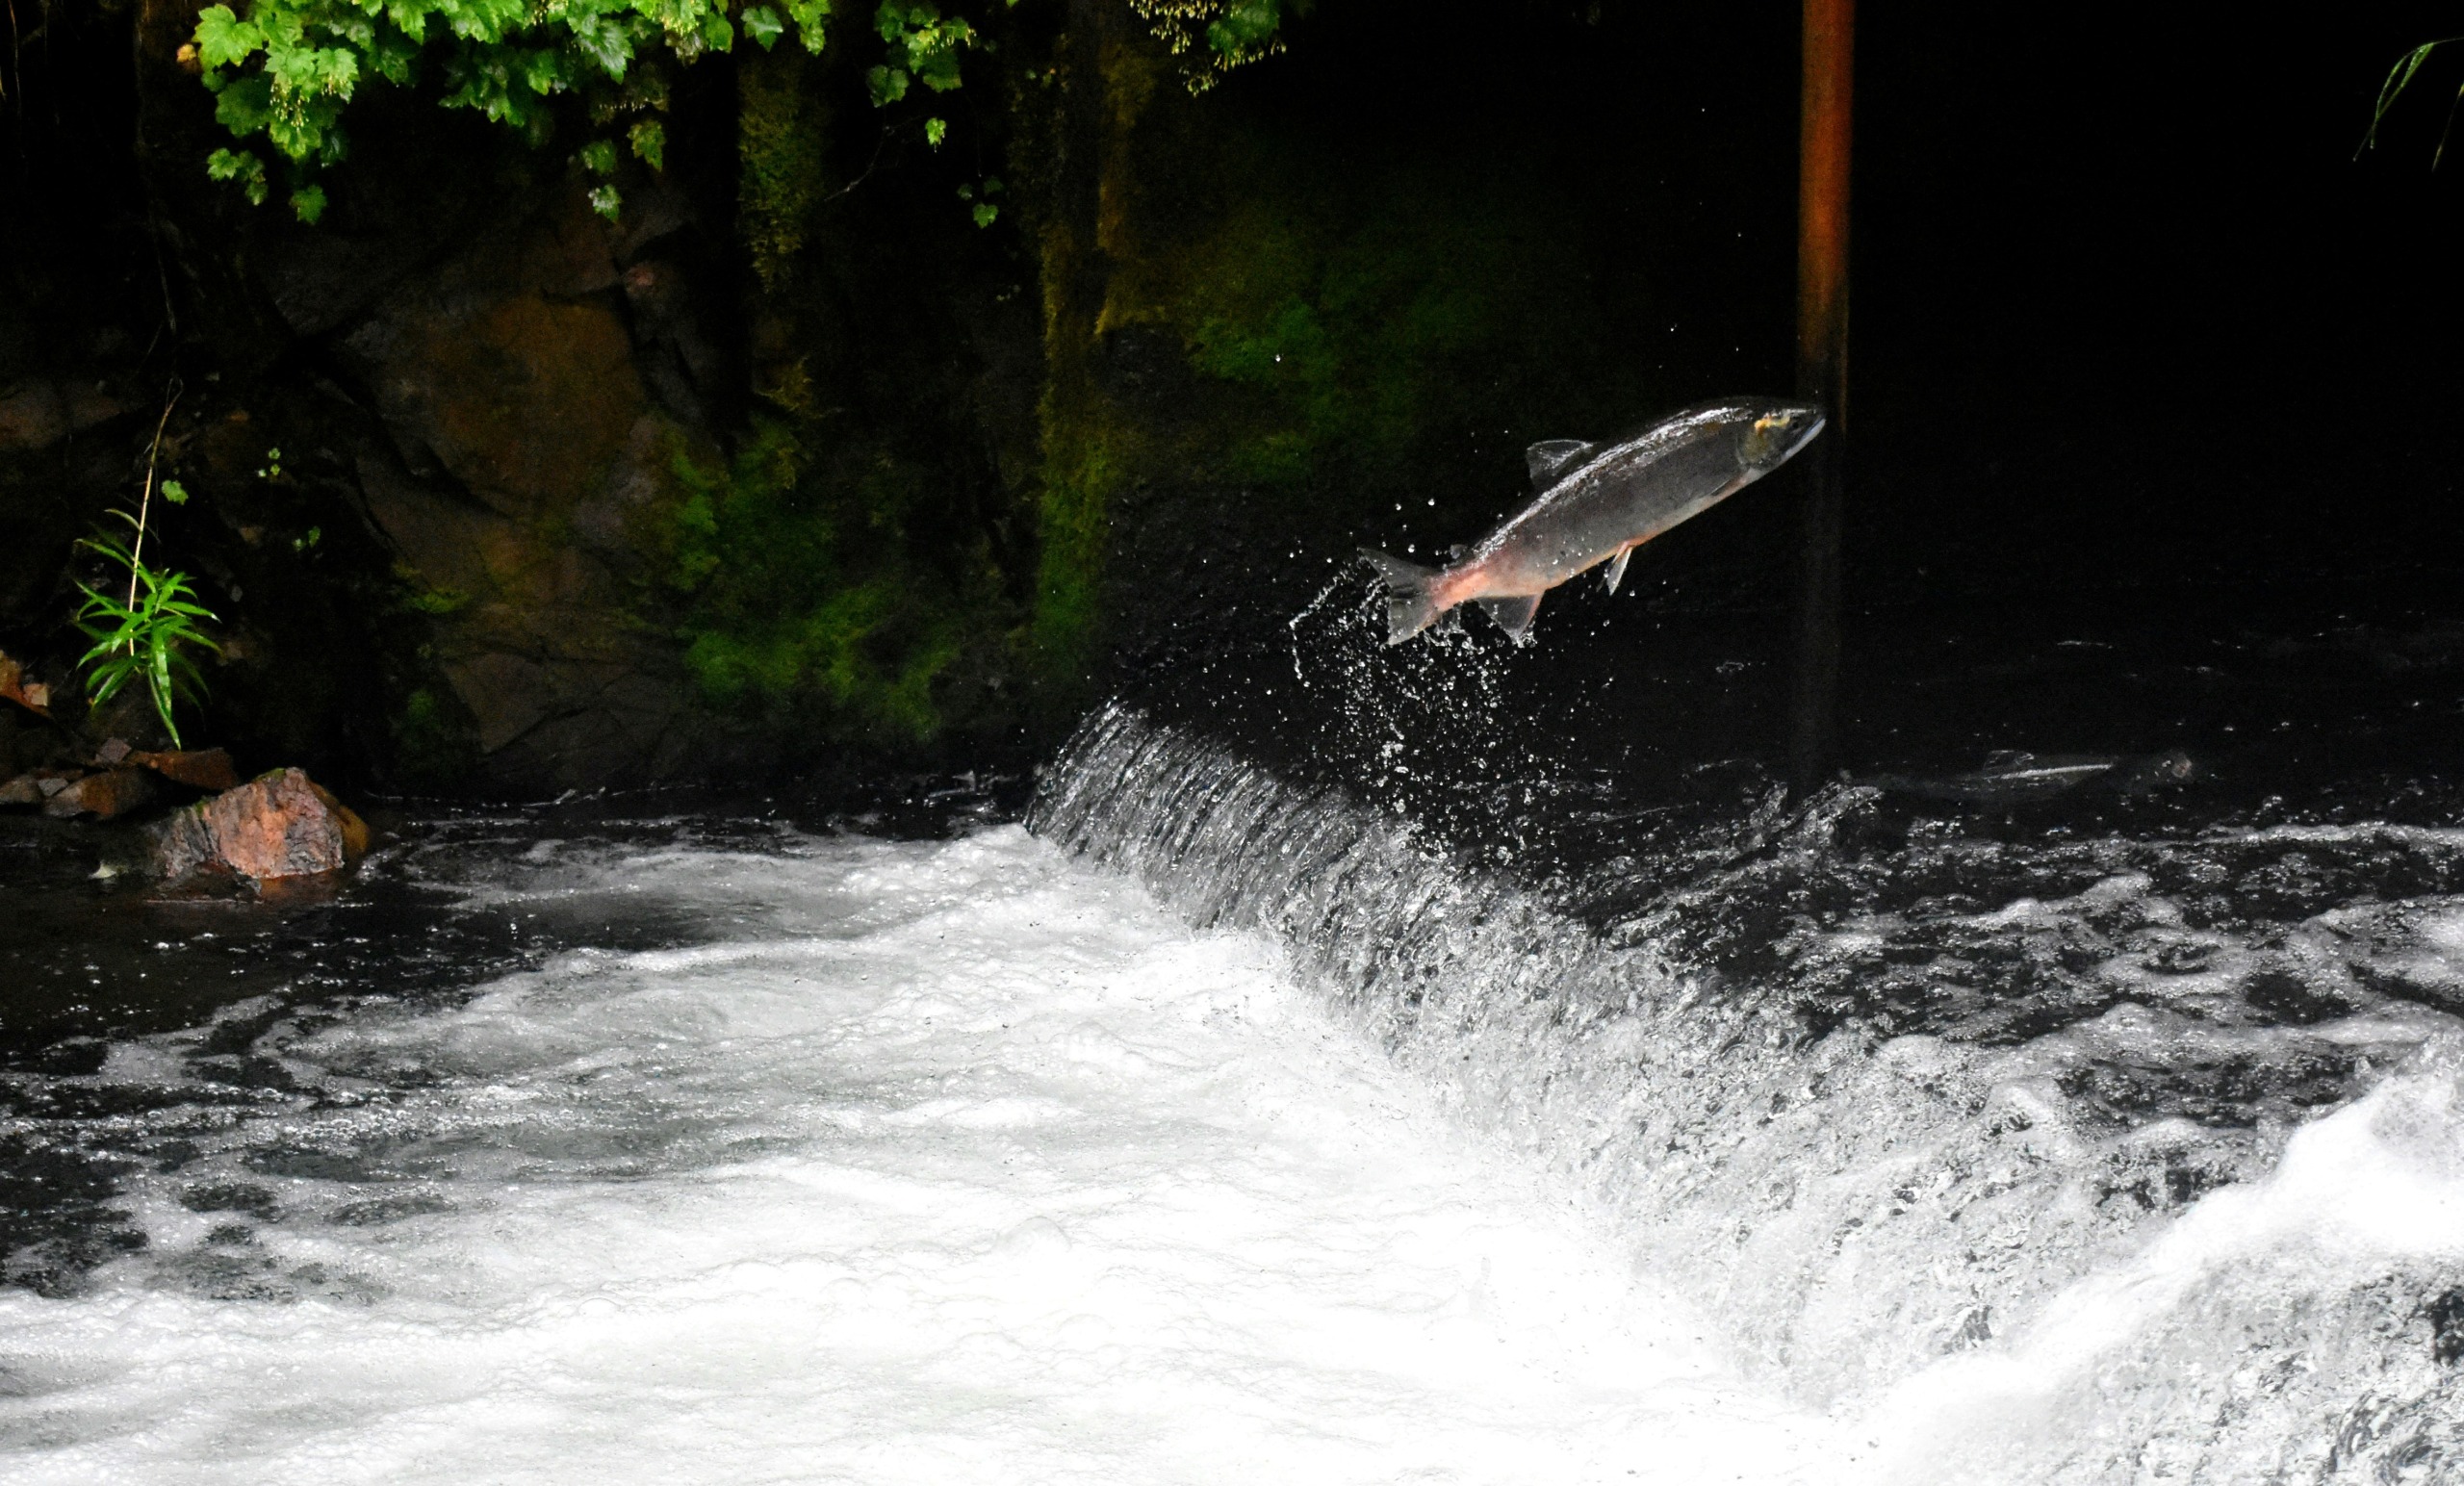 salmon jumpig over body of water surrounded with plants - photo by drew farwell